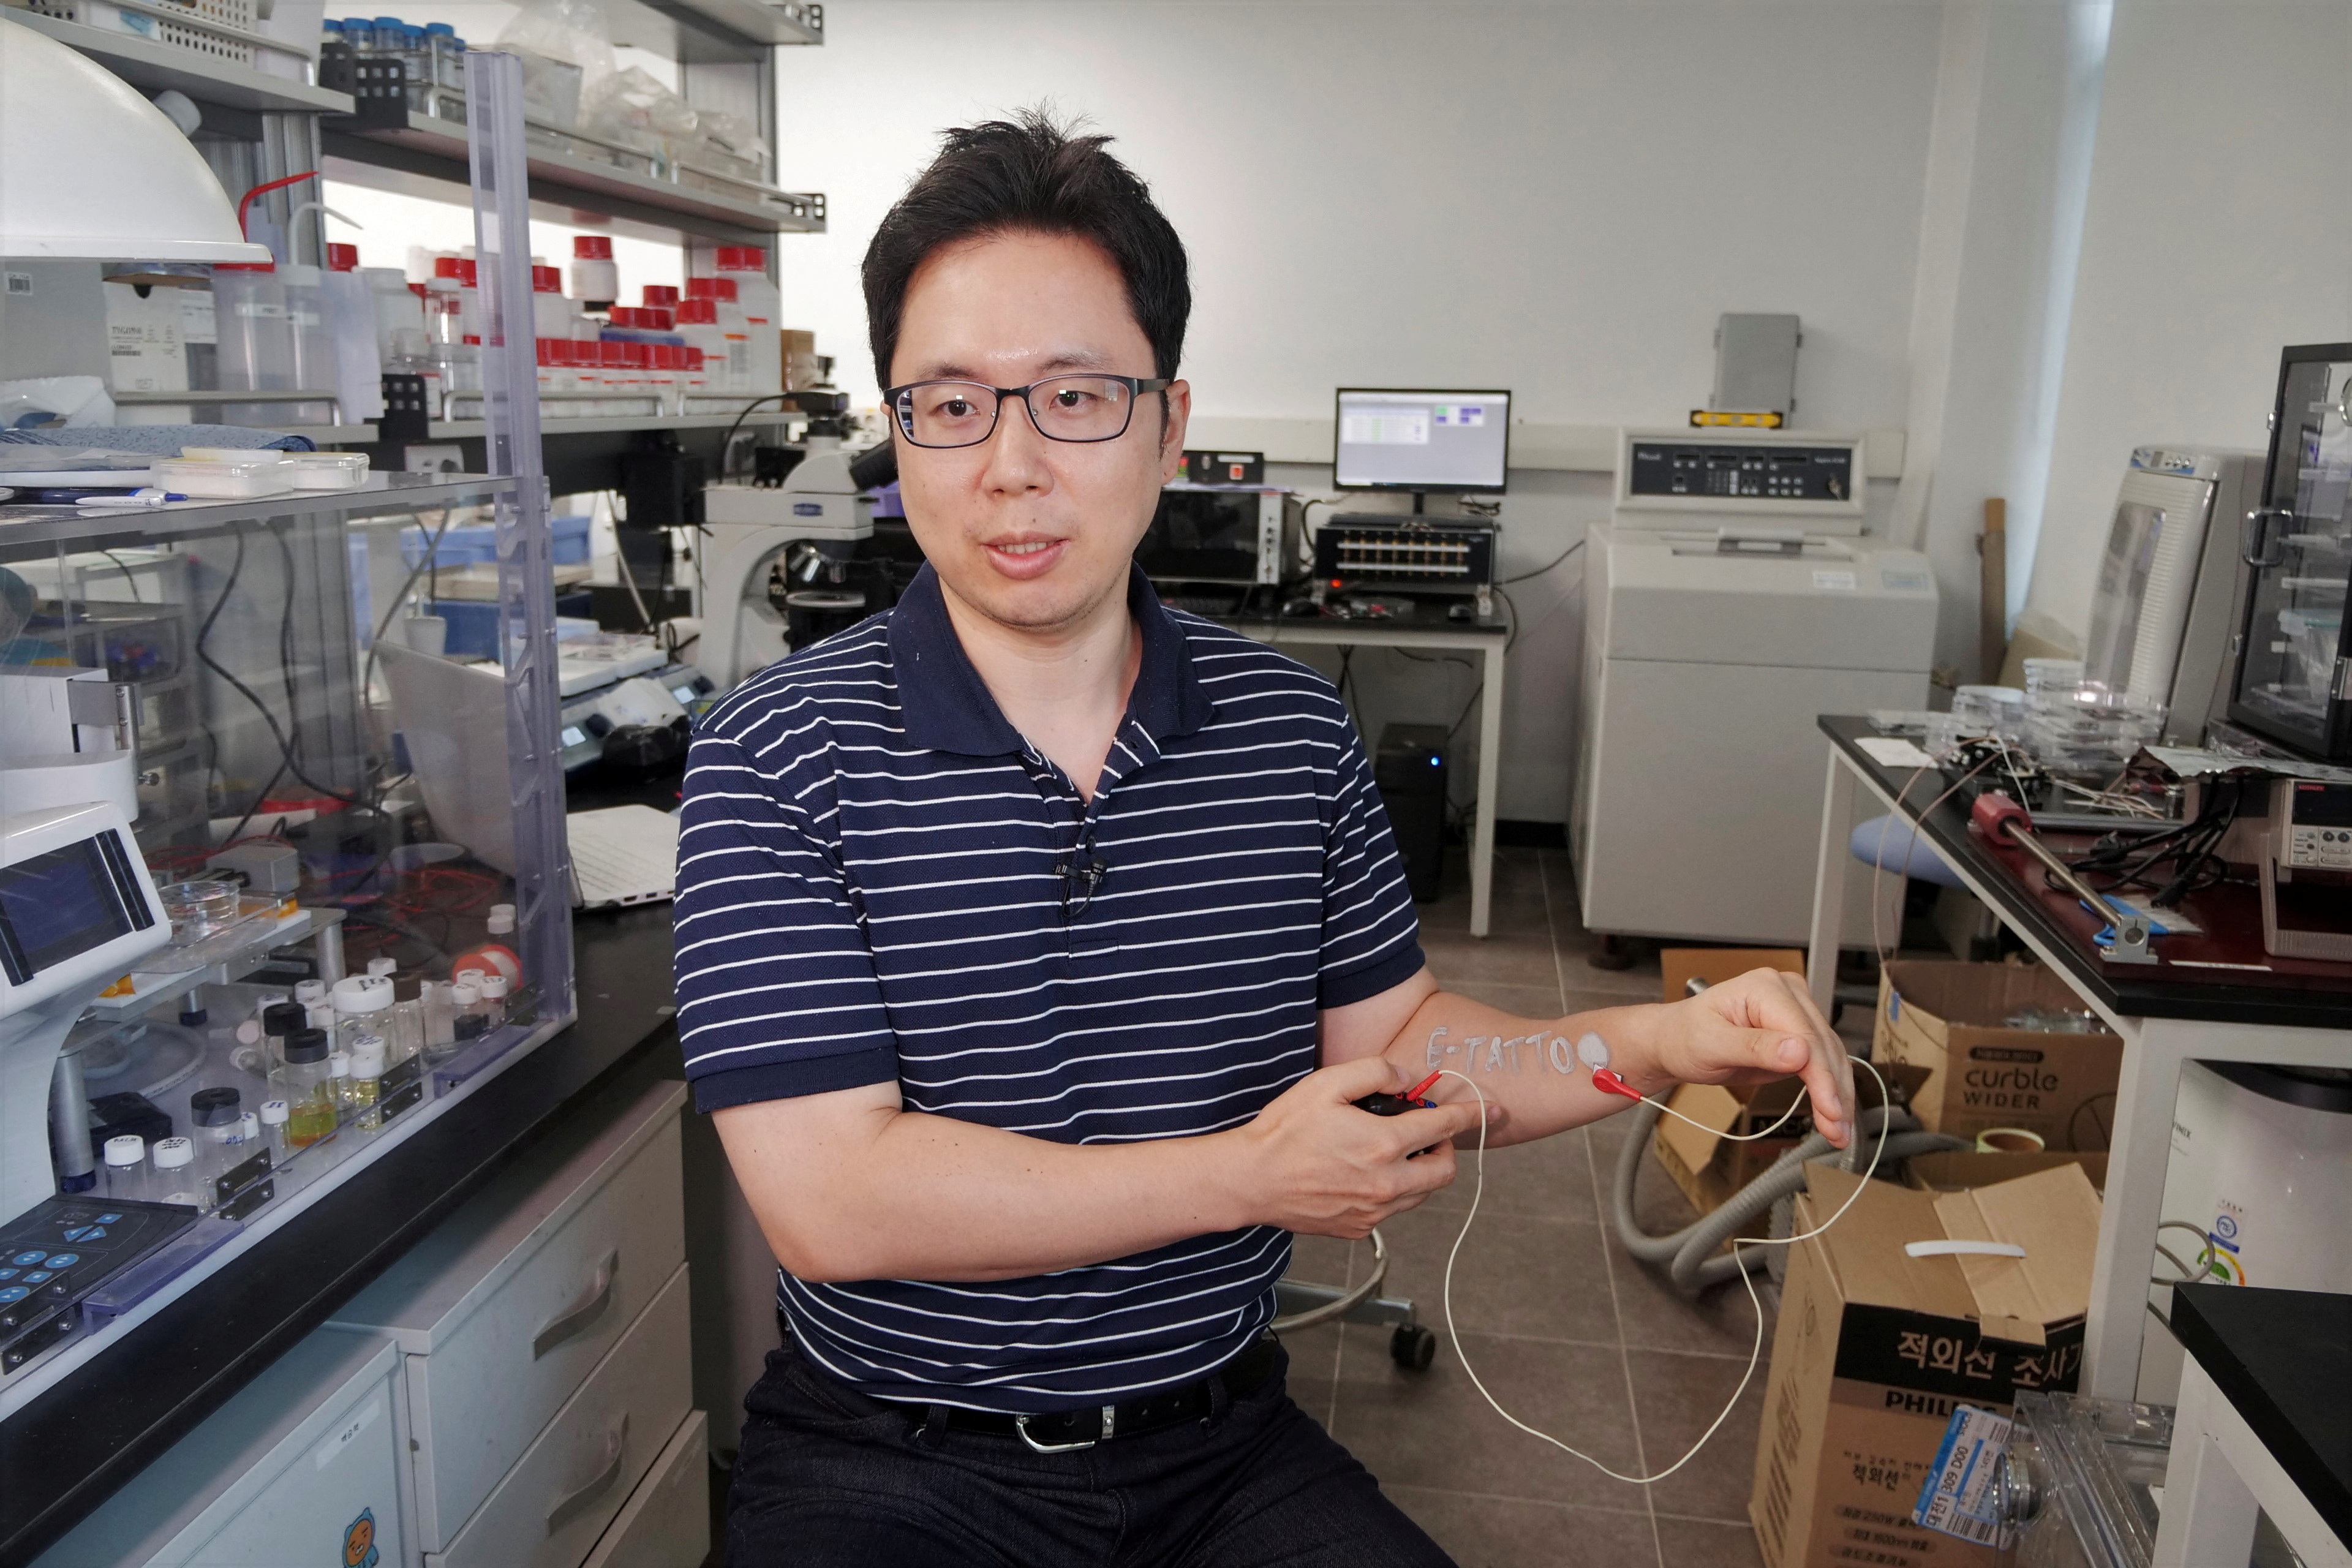 Steve Park, Materials Science & Engineering professor at Korea Advanced Institute of Science and Technology (KAIST), demonstrates an electronic tattoo (e-tattoo) on his arm connected with an electrocardiogram (ECG) monitoring system in Daejeon